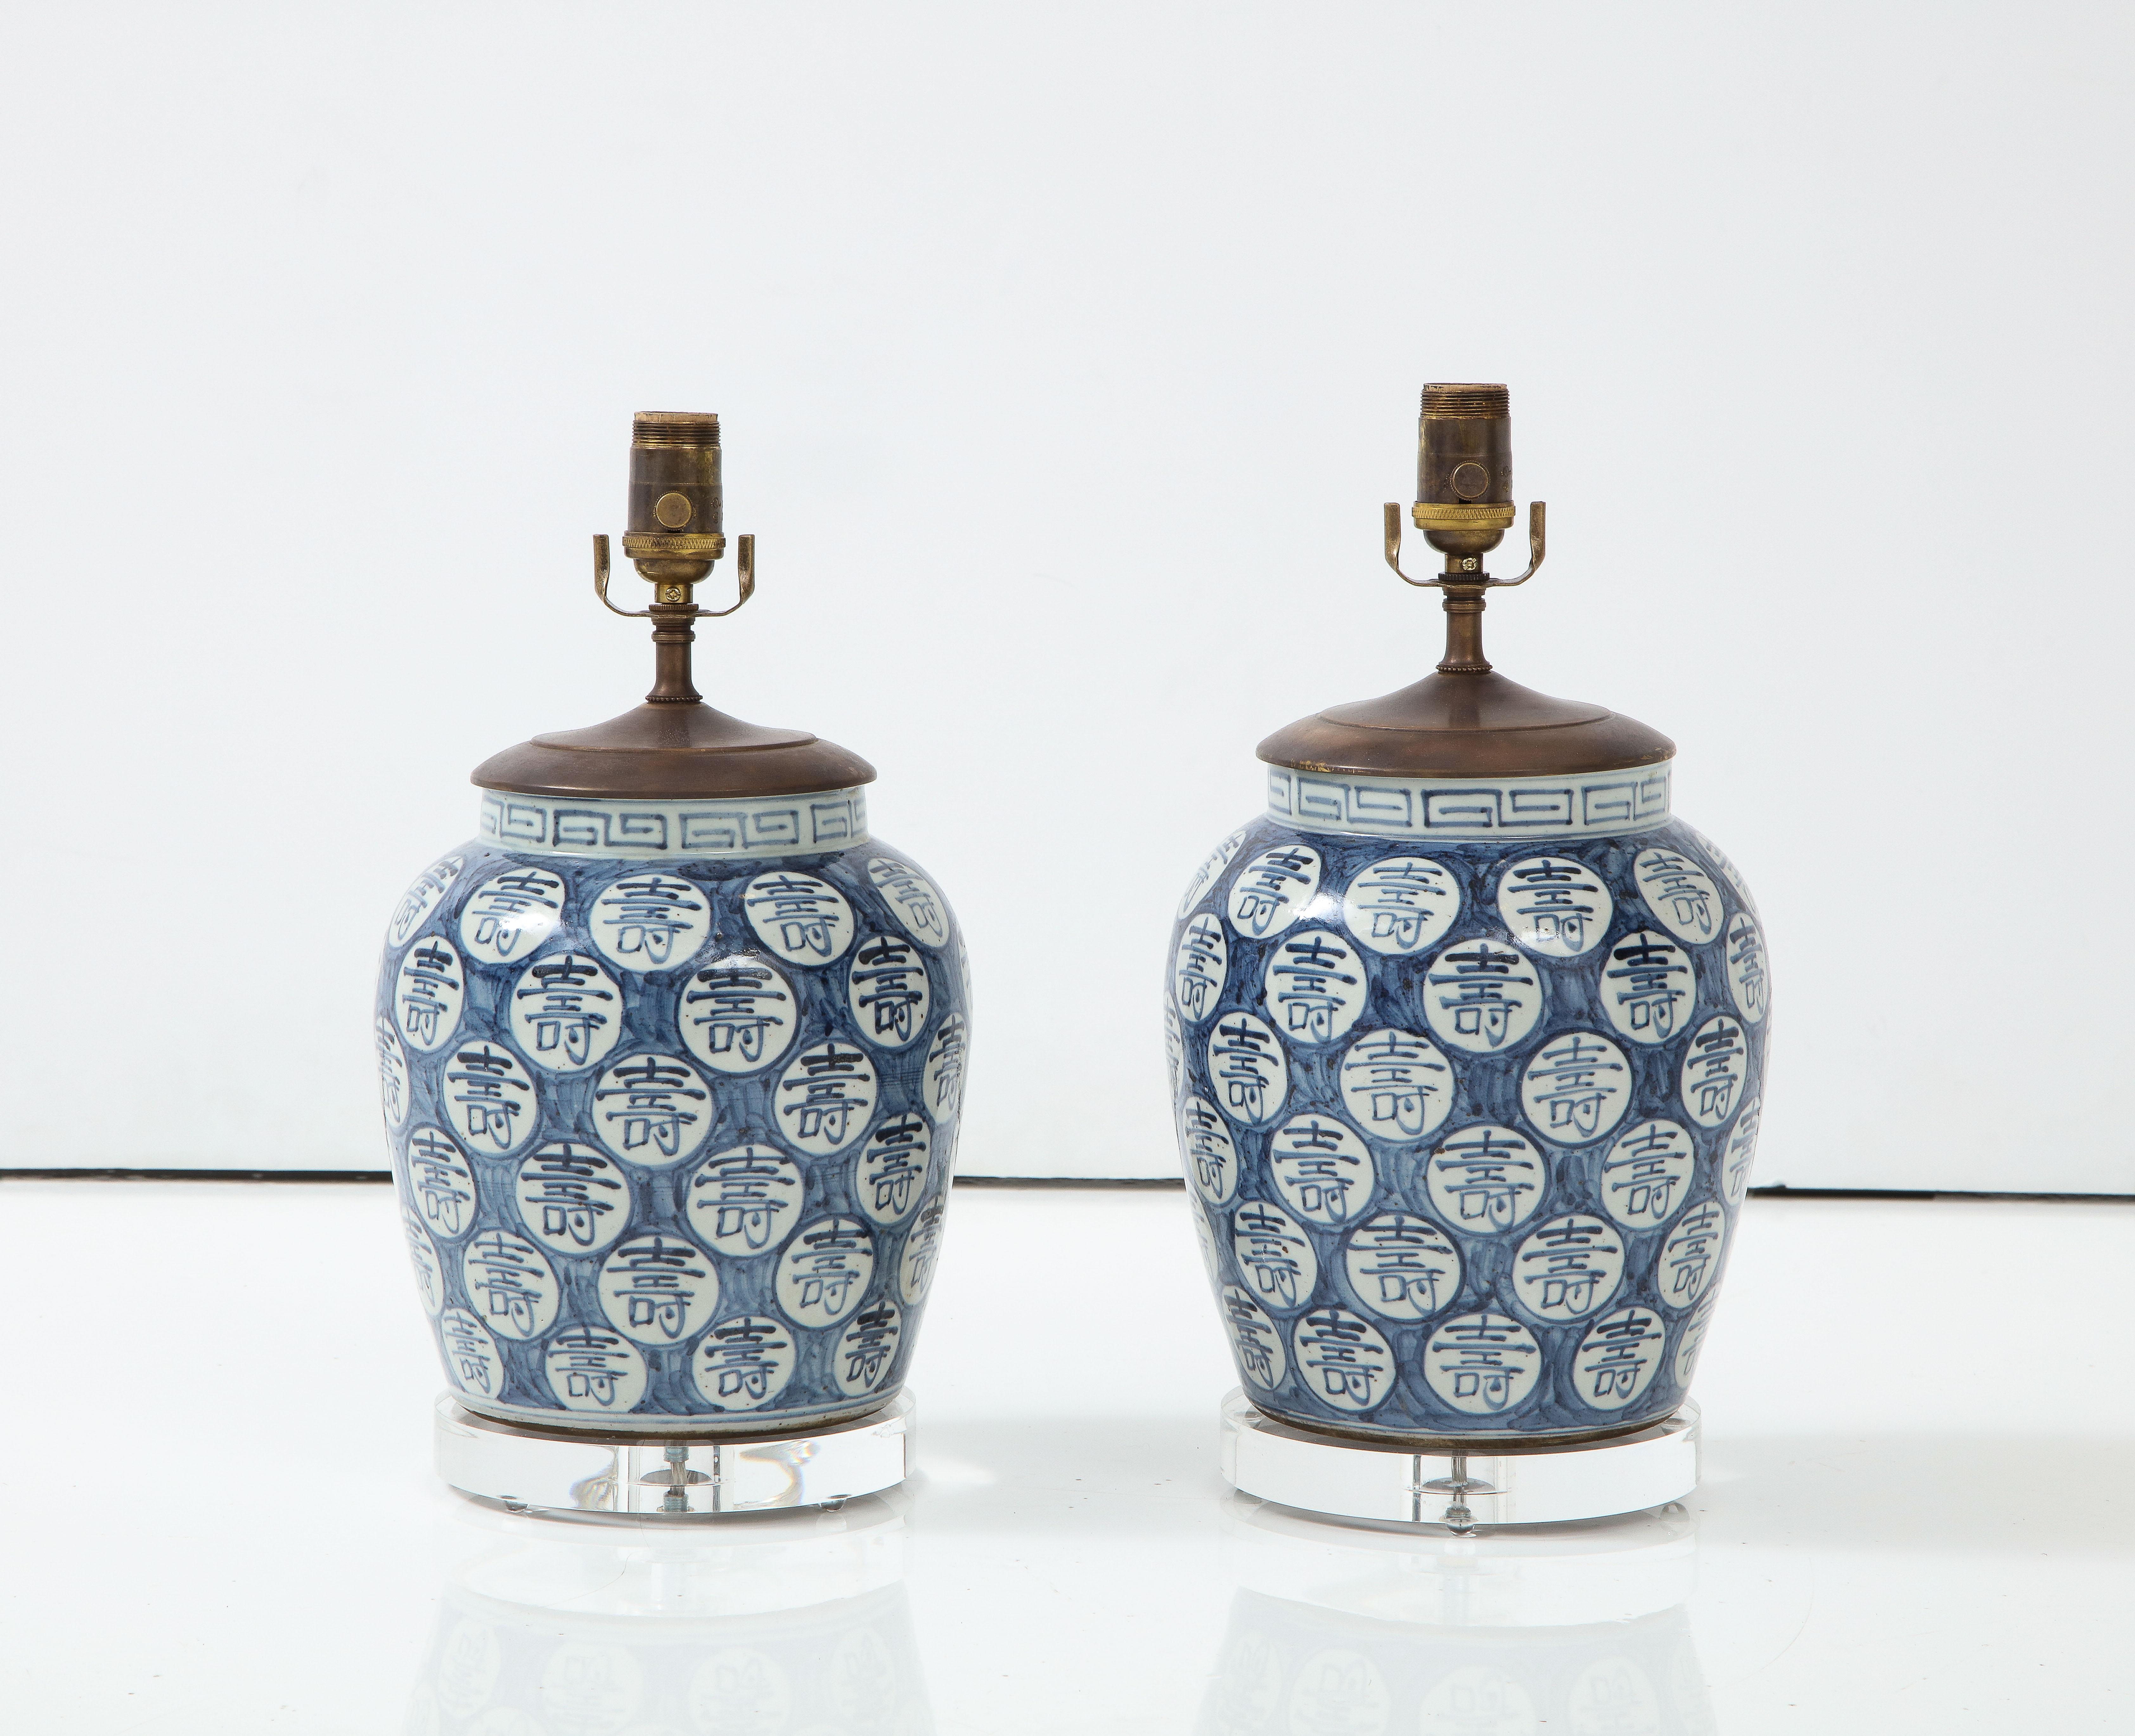 Blue and white will never go out of style. This pair of Chinese export jars have been made into great looking lamps on a lucite base. Their shape is clean and simple, and we consider them almost a neutral--they can work in any color scheme, in